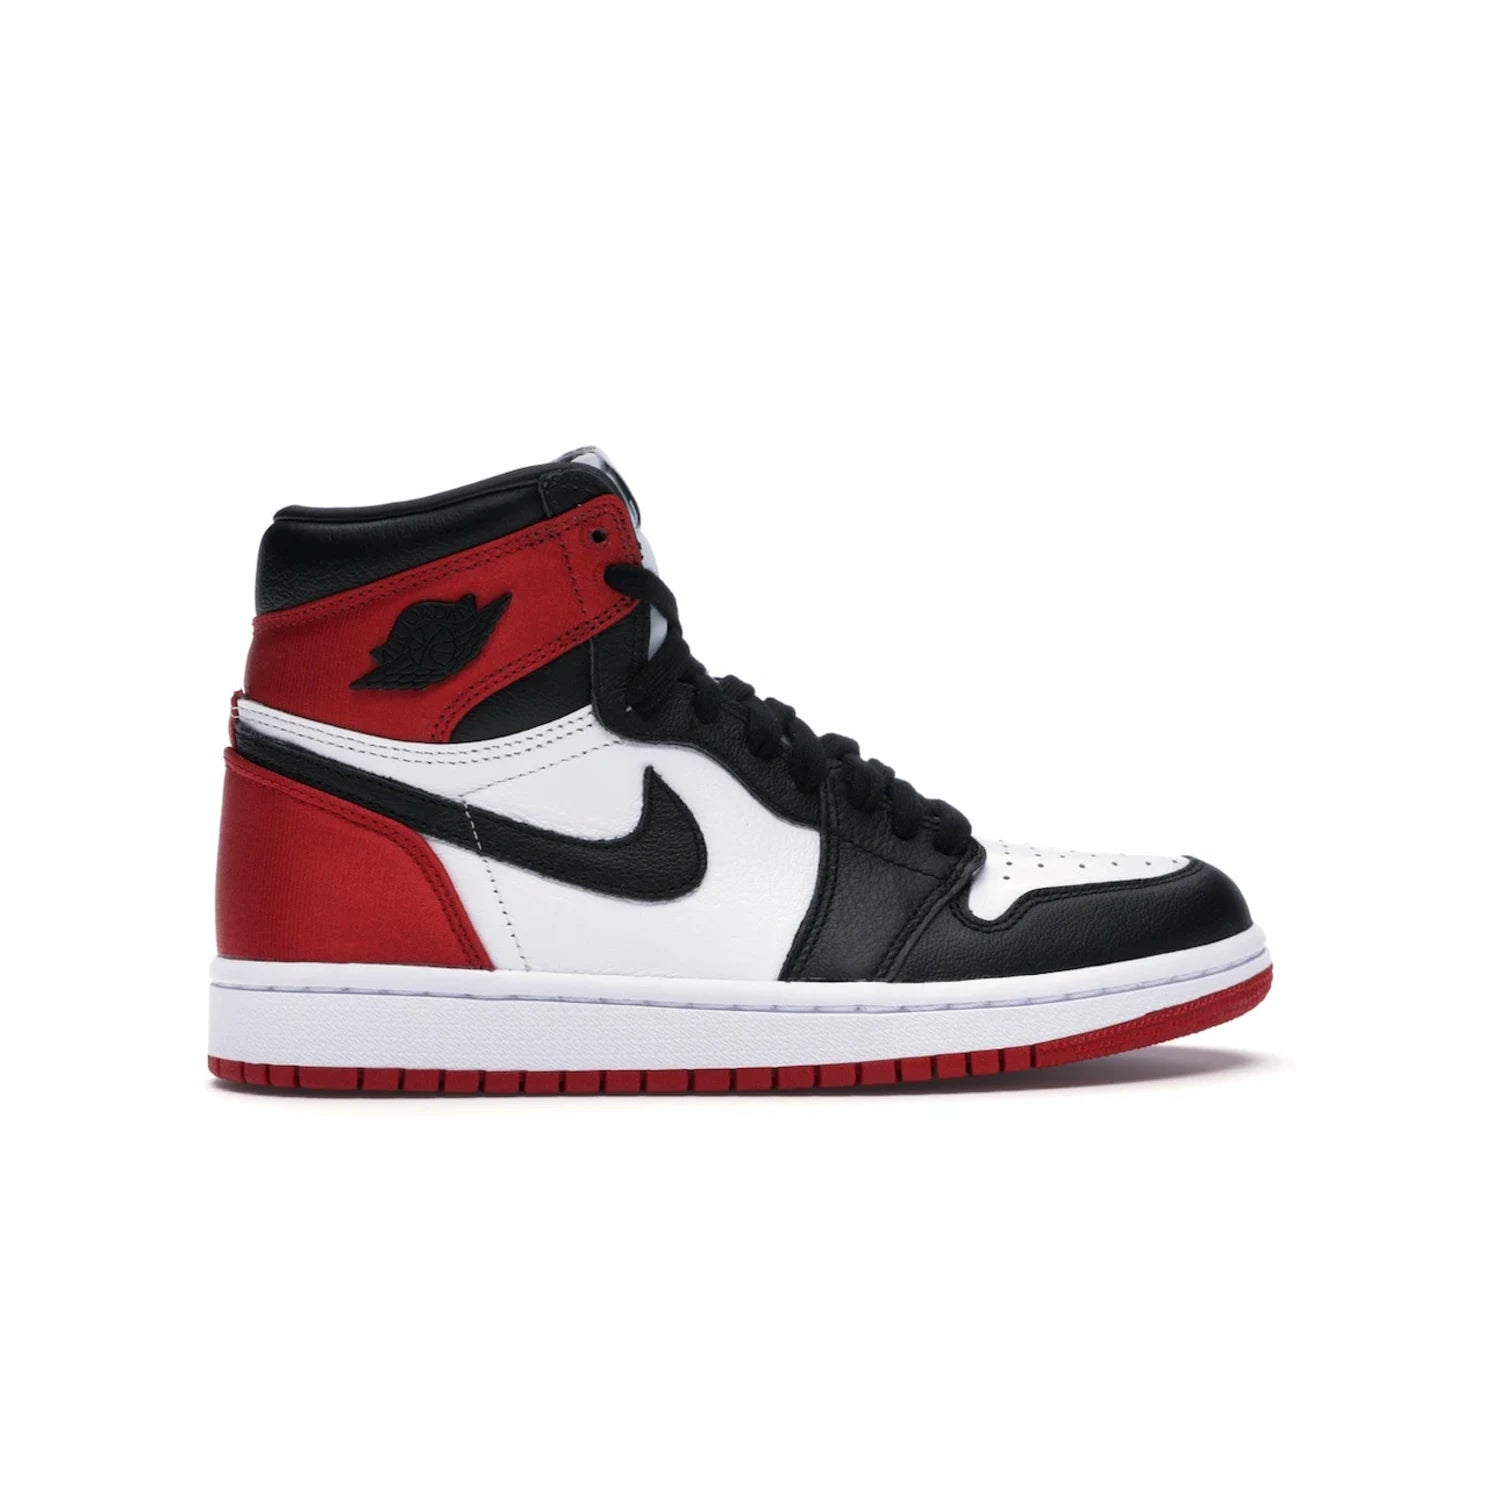 Jordan 1 Retro High Satin Black Toe (Women's) - Image 36 - Only at www.BallersClubKickz.com - Luxurious take on the timeless Air Jordan 1. Features a mix of black leather and satin materials with subtle University Red accents. Elevated look with metal Wings logo on the heel. Released in August 2019.